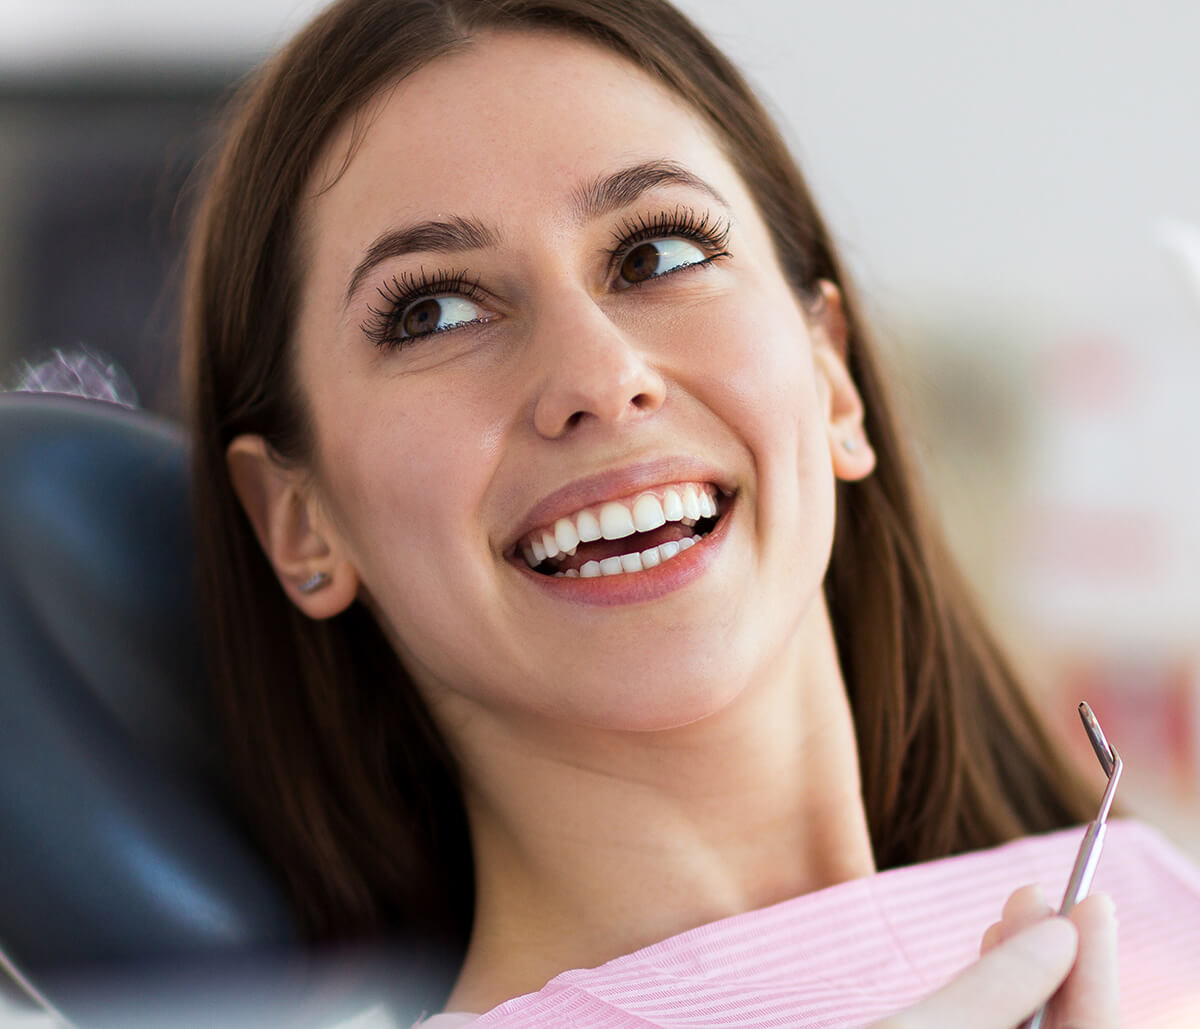 Dentist Explains the Importance of Your Third Molar Tooth in Fort Lauderdale, FL Area